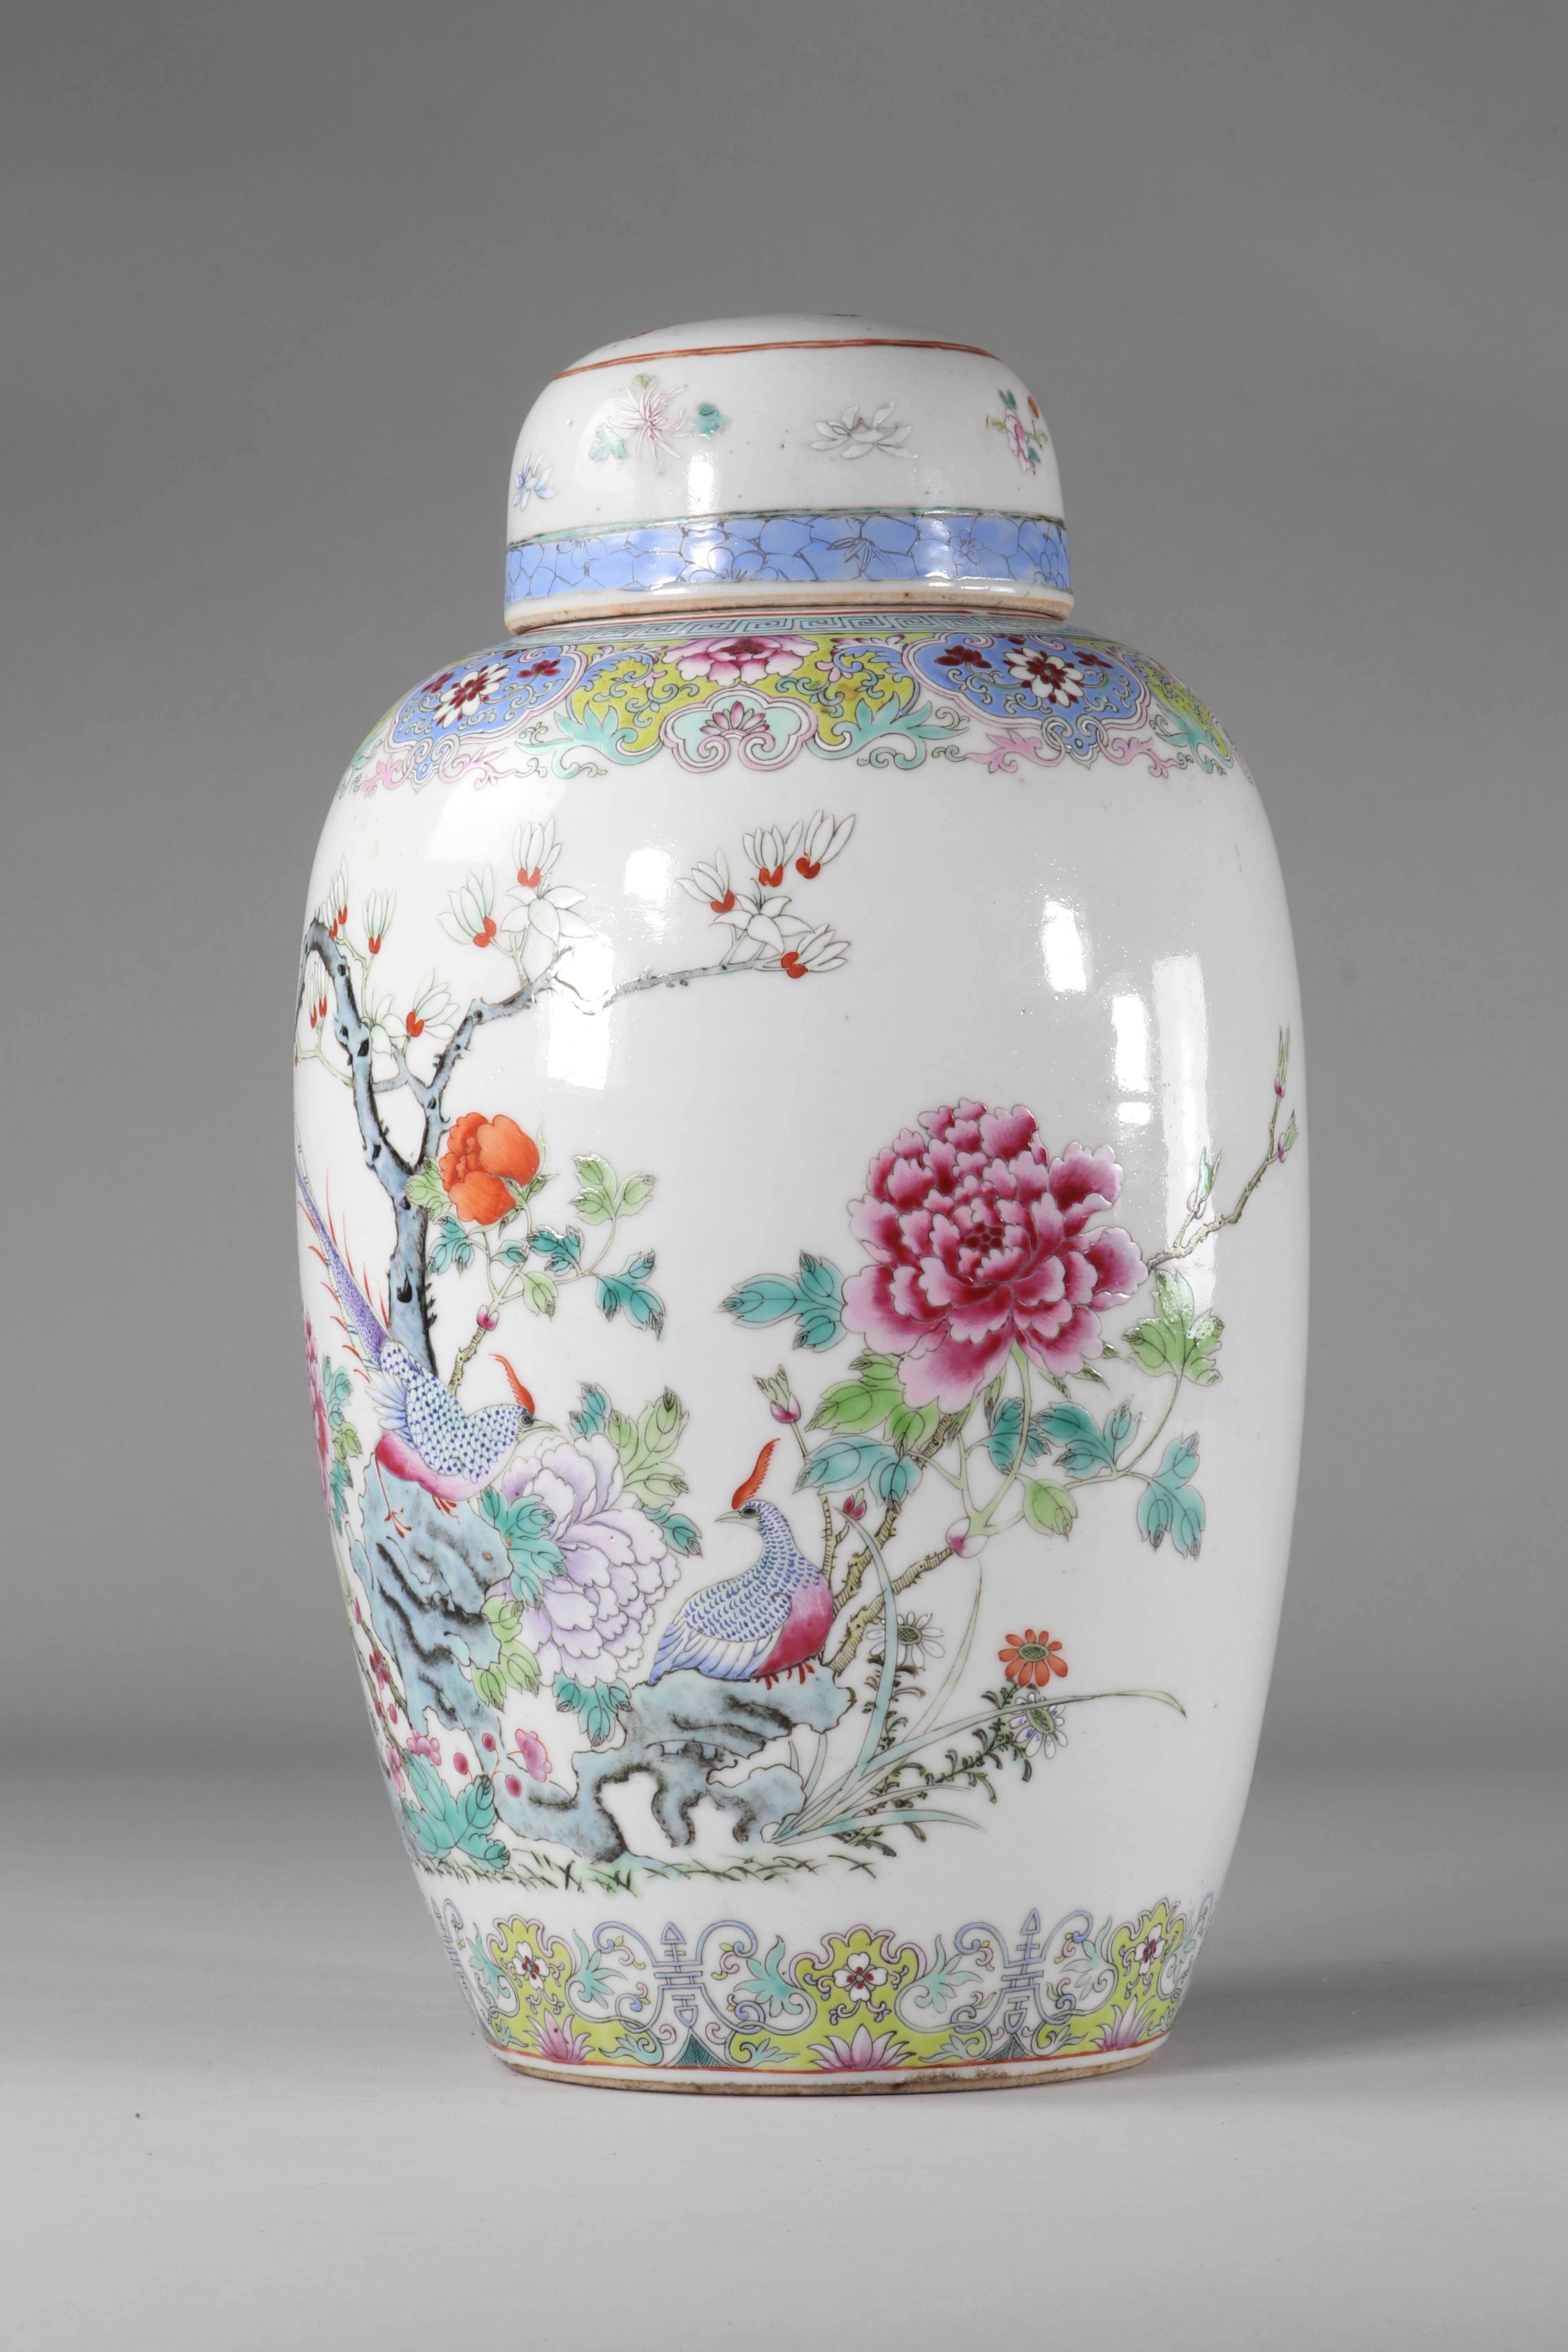 China famille rose porcelain vase decorated with birds and flowers Qing period - Image 2 of 7